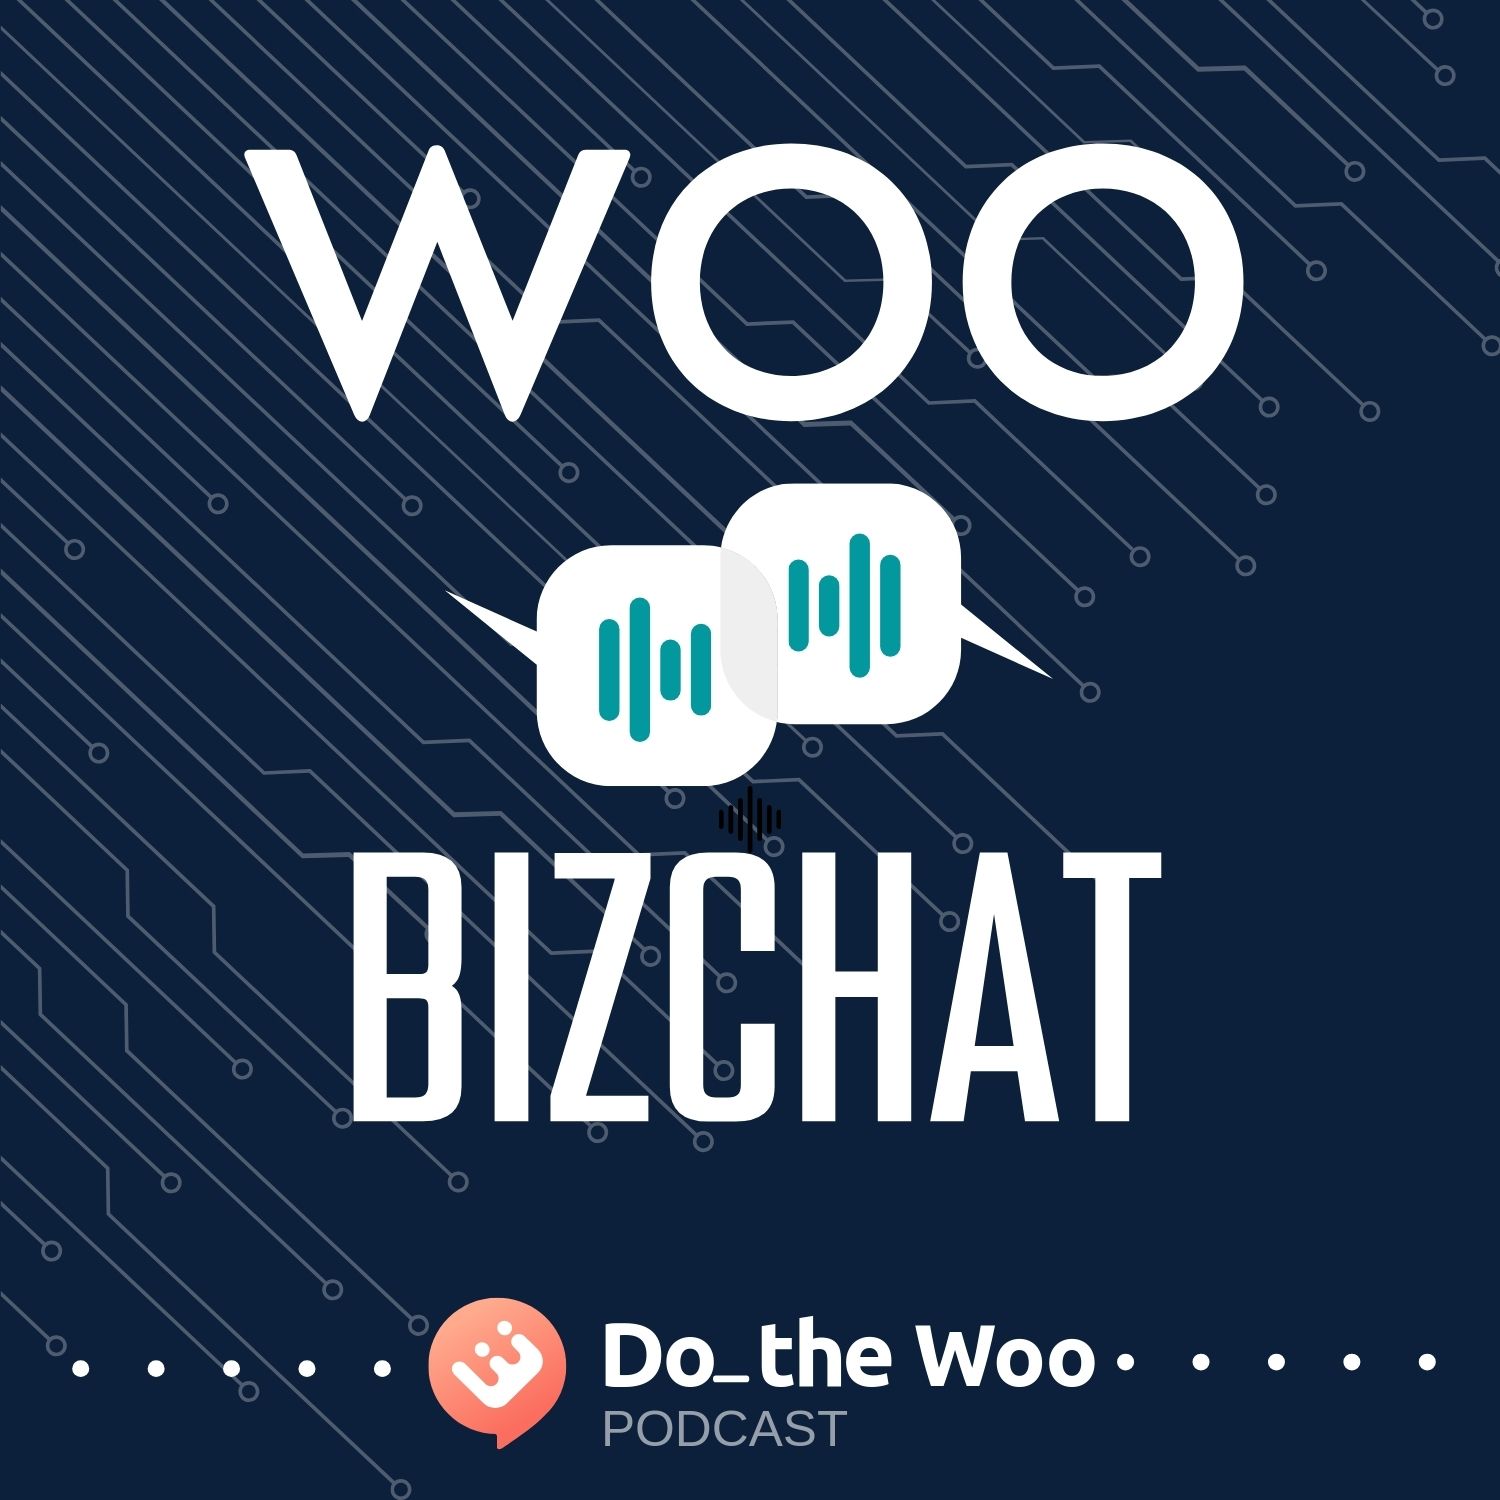 Pricing Services for WordPress and Woo with Brian Rotsztein